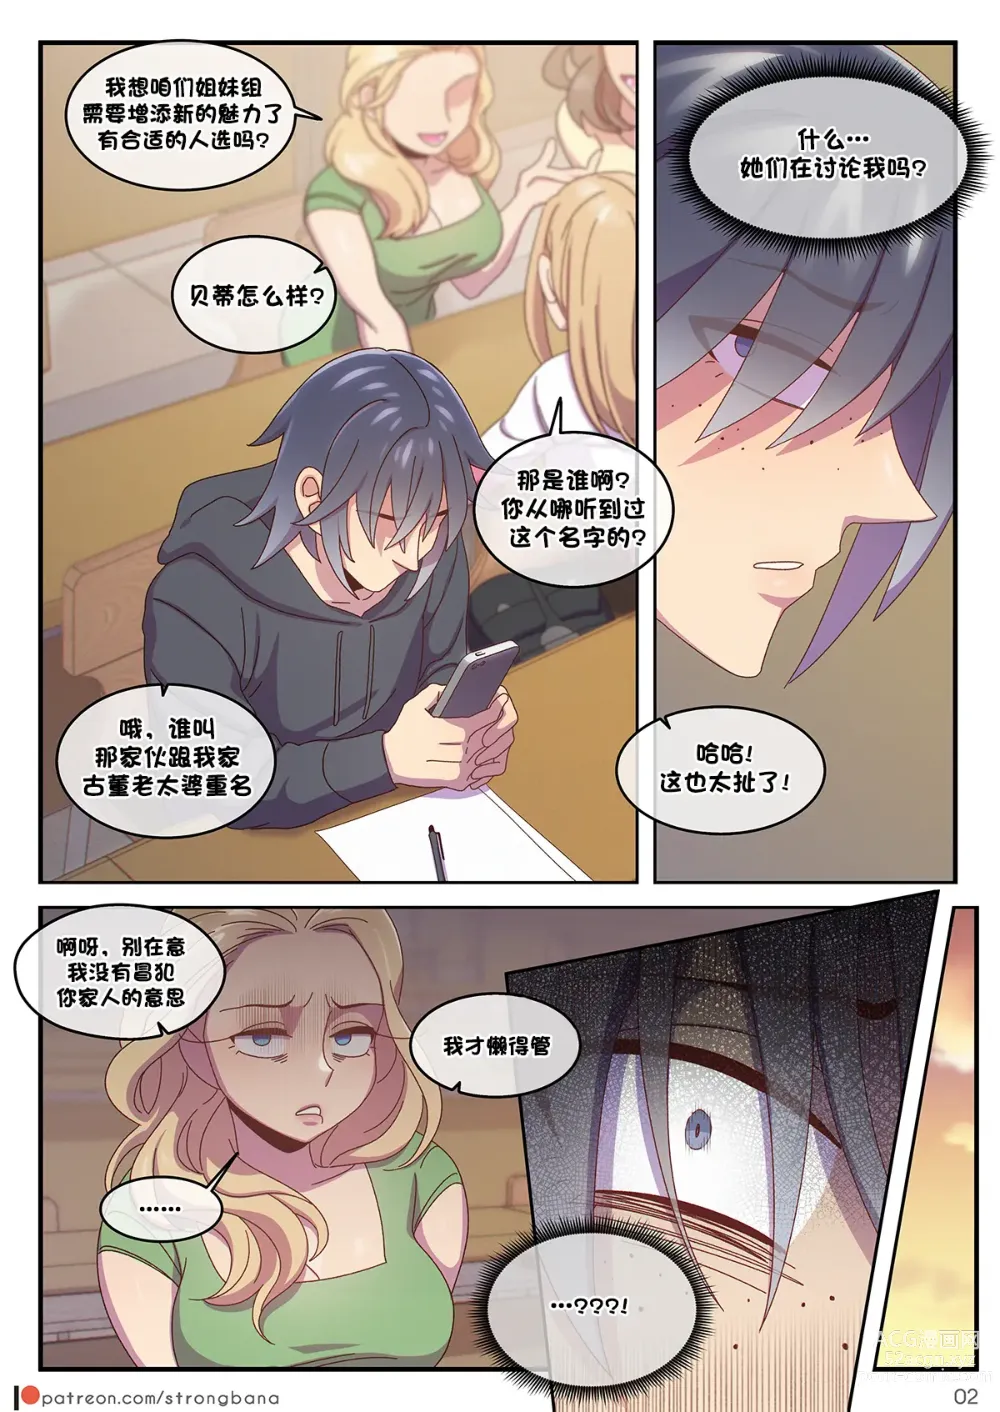 Page 4 of doujinshi JUST 666$